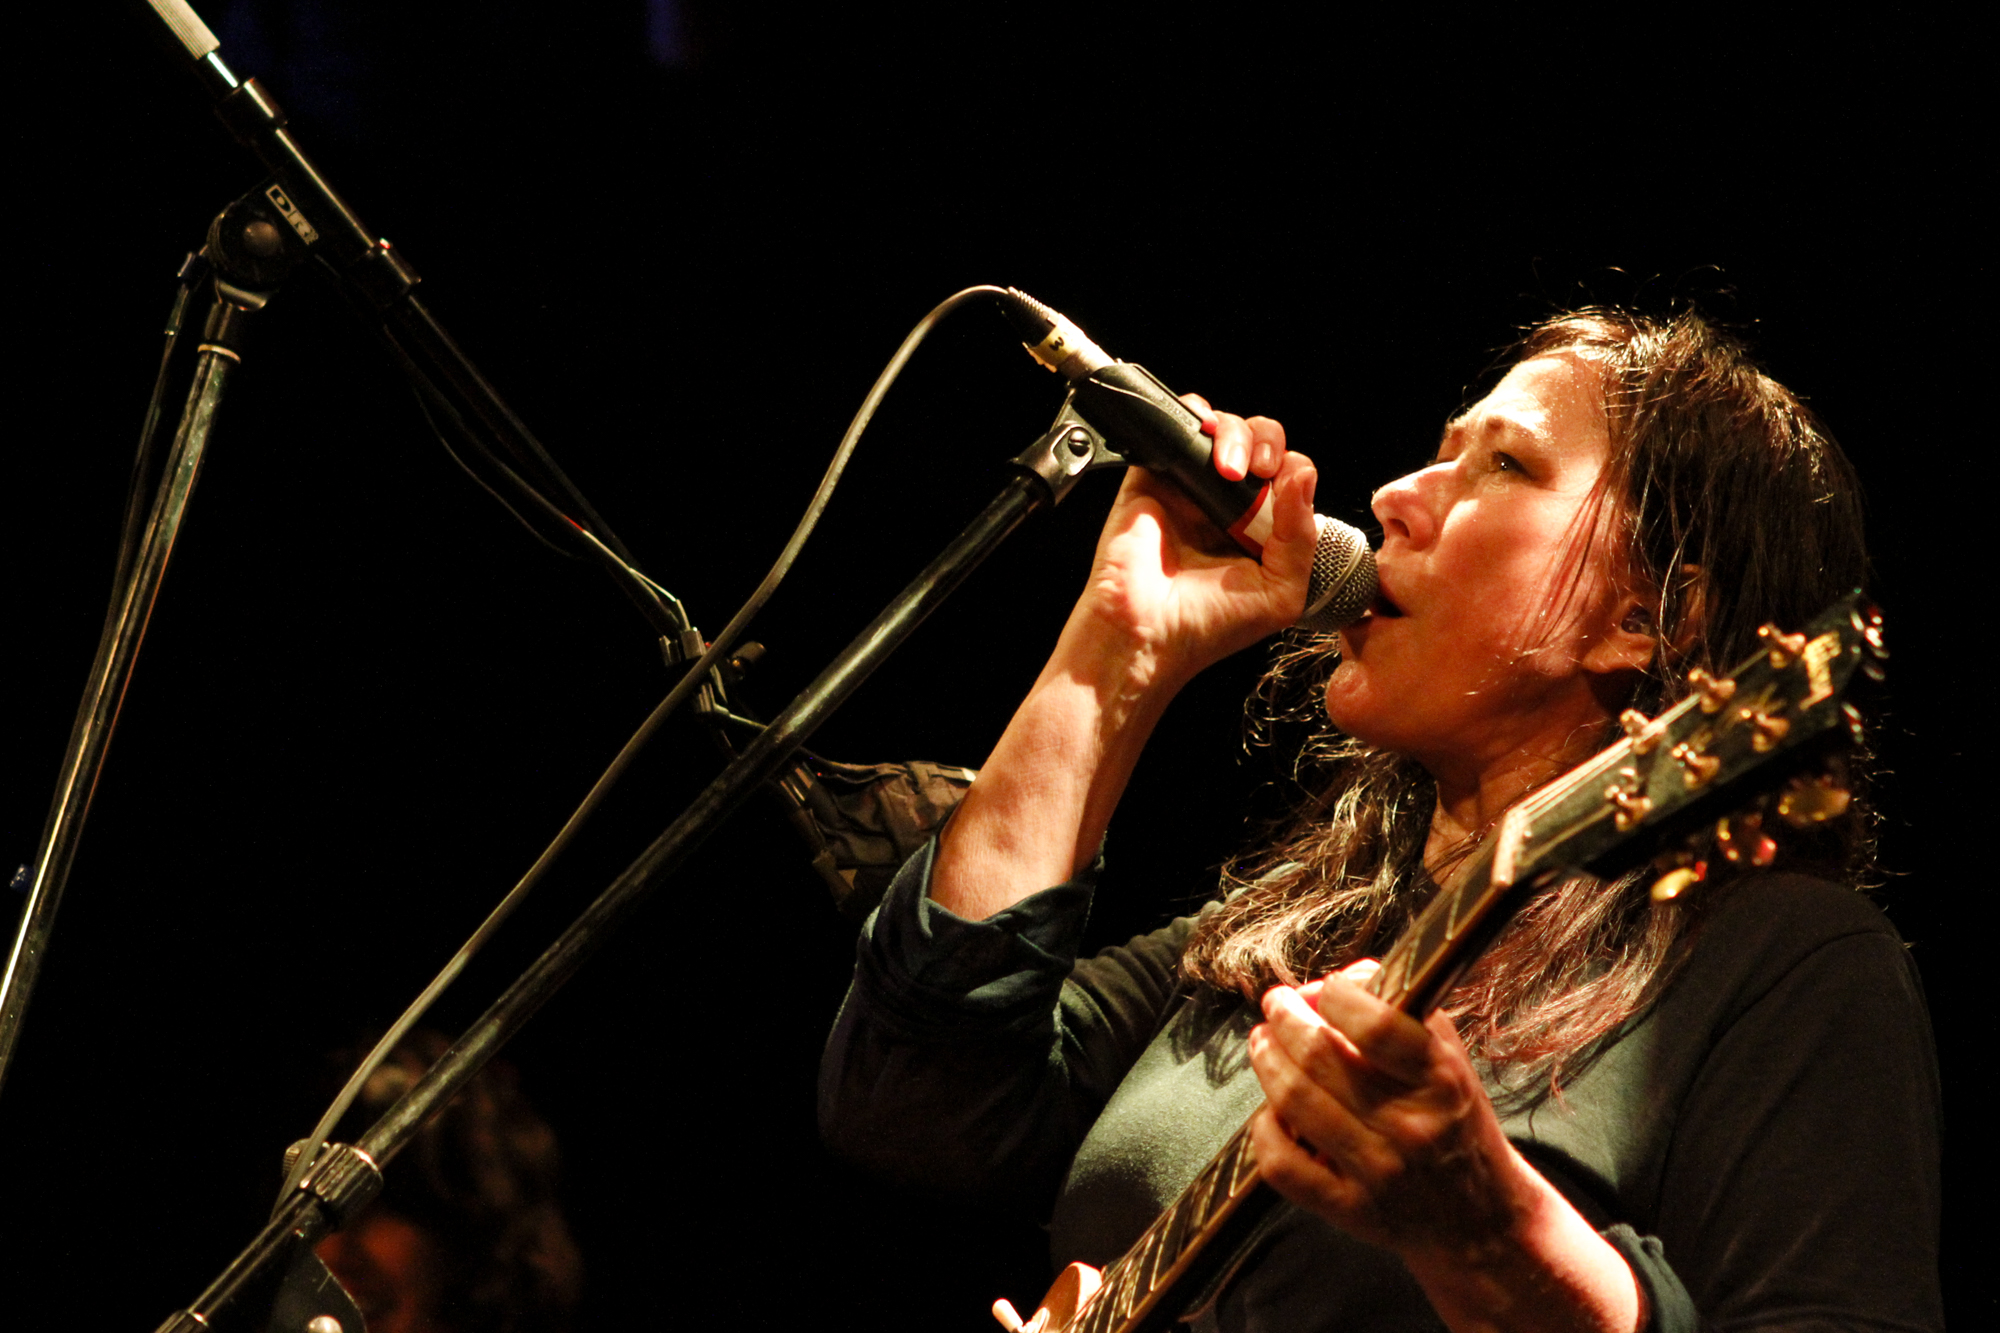 The Breeders play at Bowery Ballroom in New York, New York on Nov. 5, 2017. (© Michael Katzif - Do not use or republish without prior consent.)